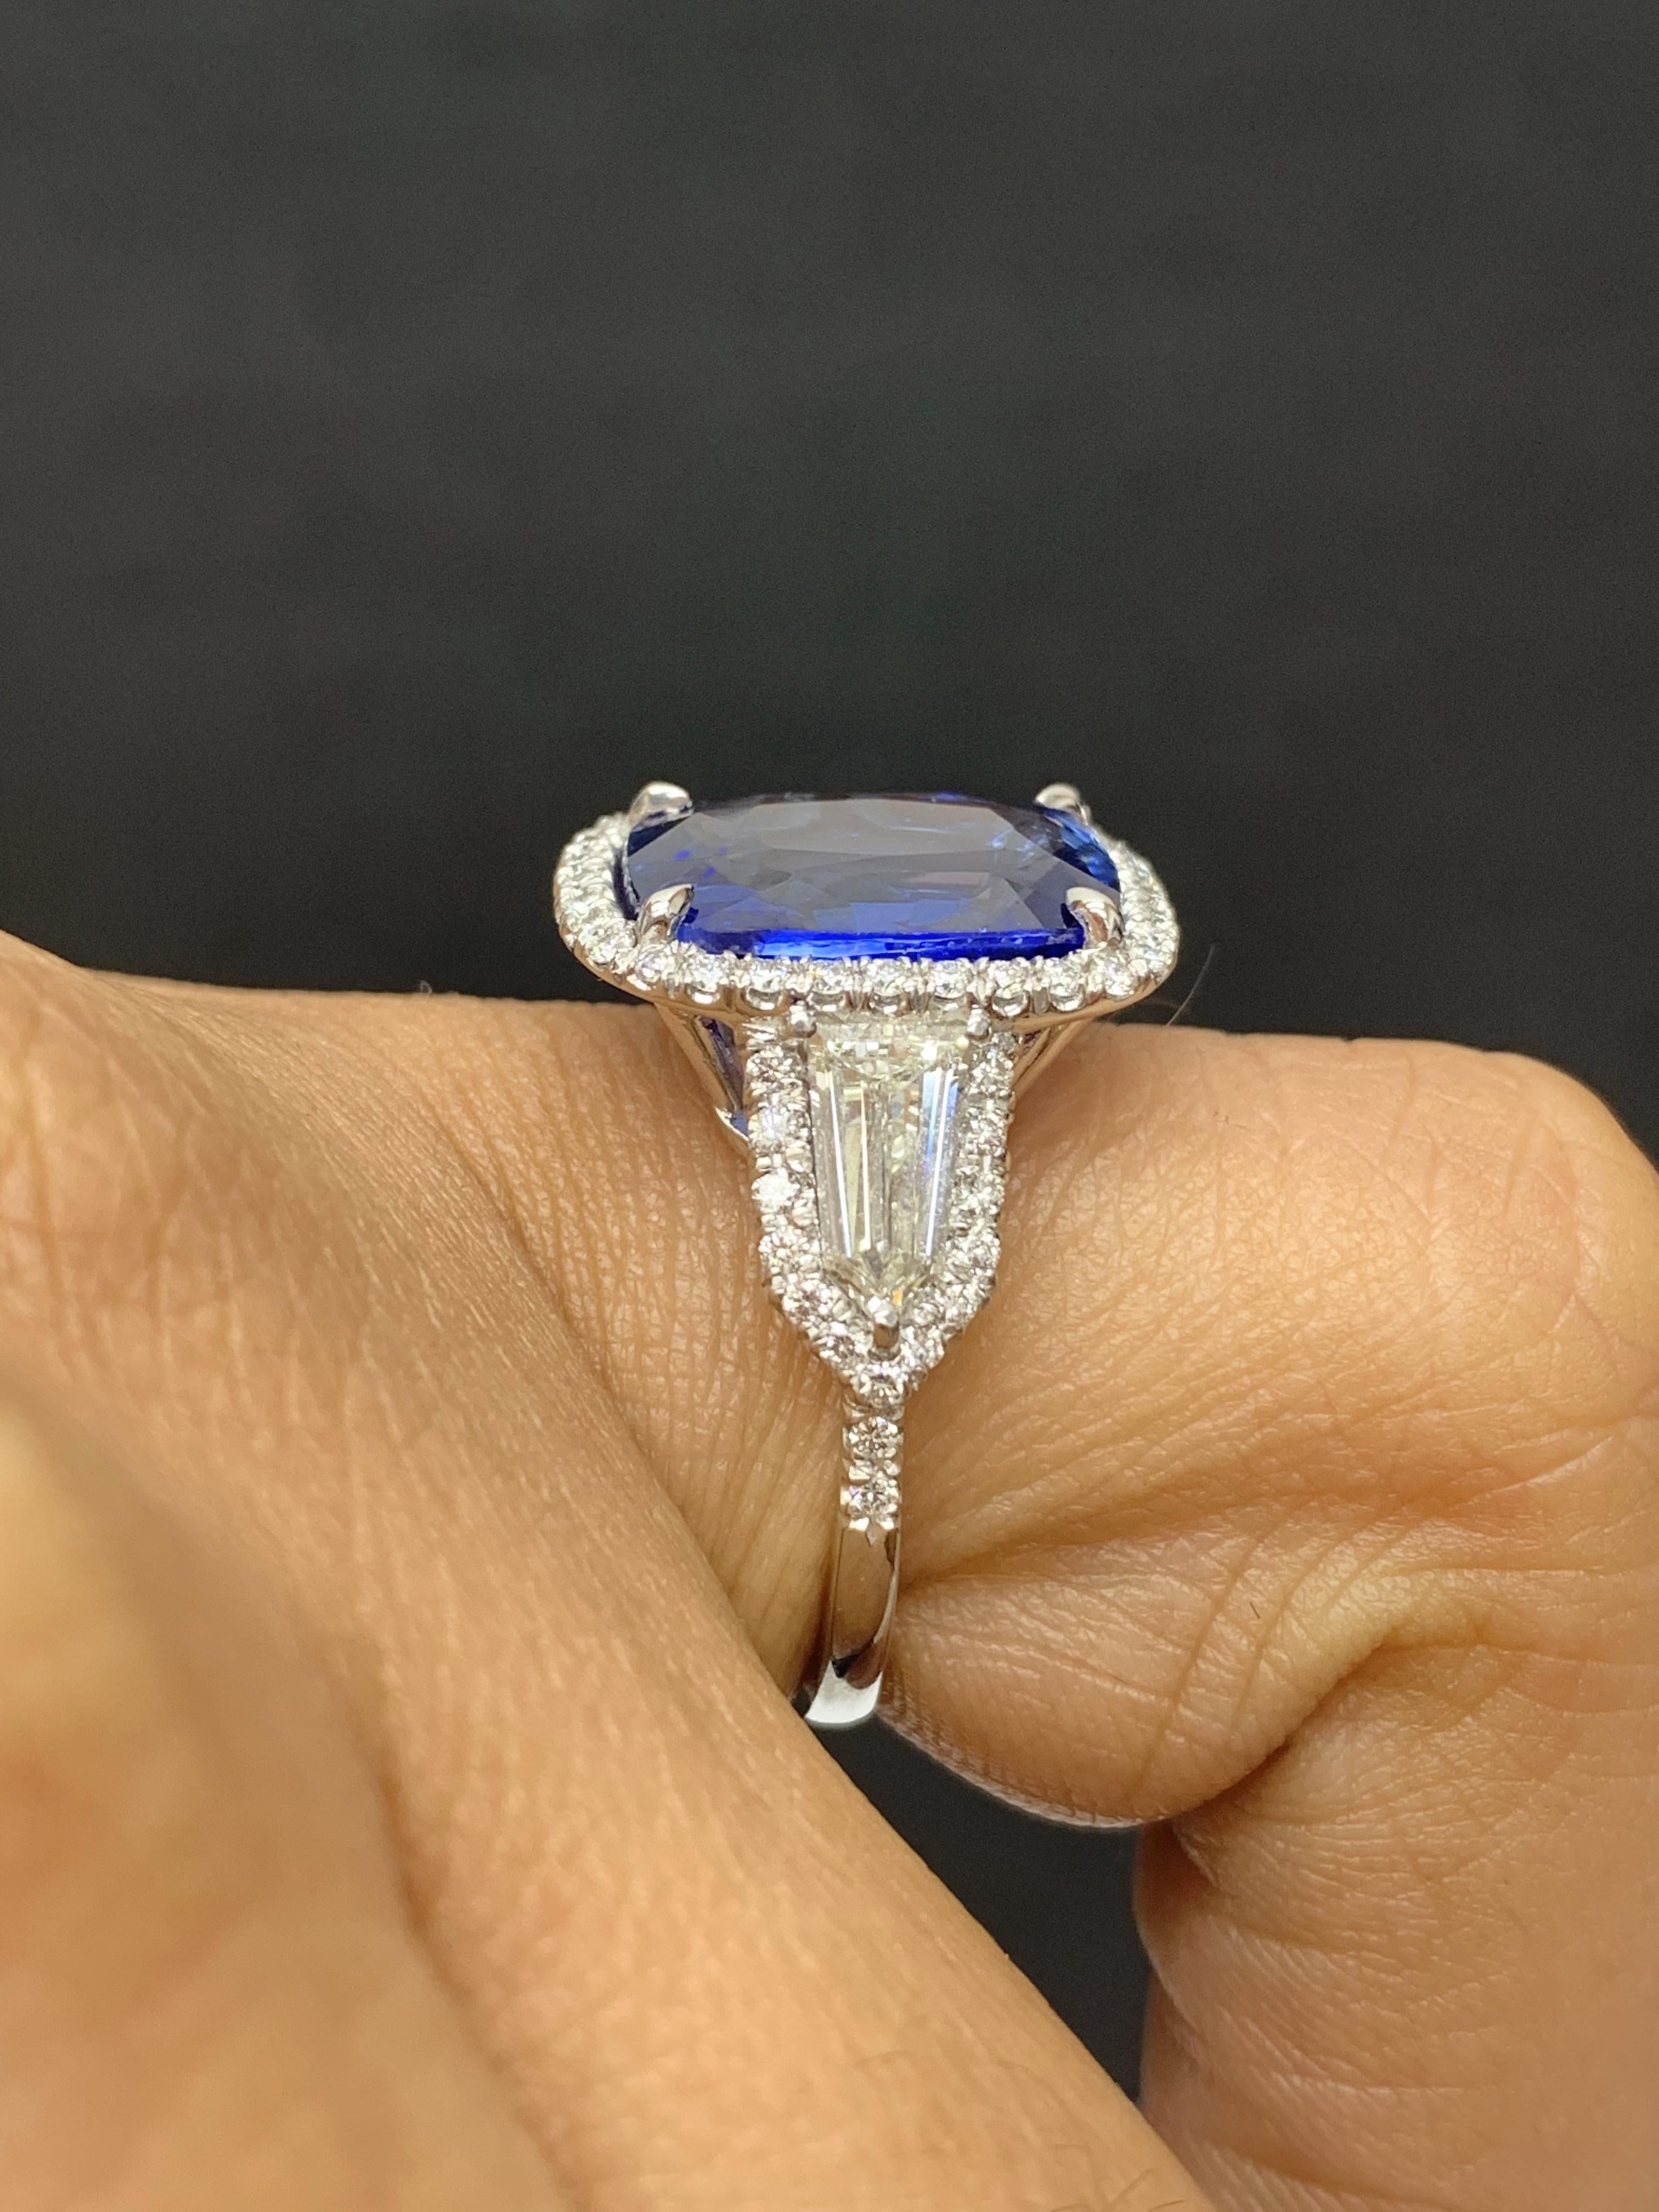 7.51 Carat Cushion Cut Sapphire and Diamond Engagement Ring in Platinum For Sale 9